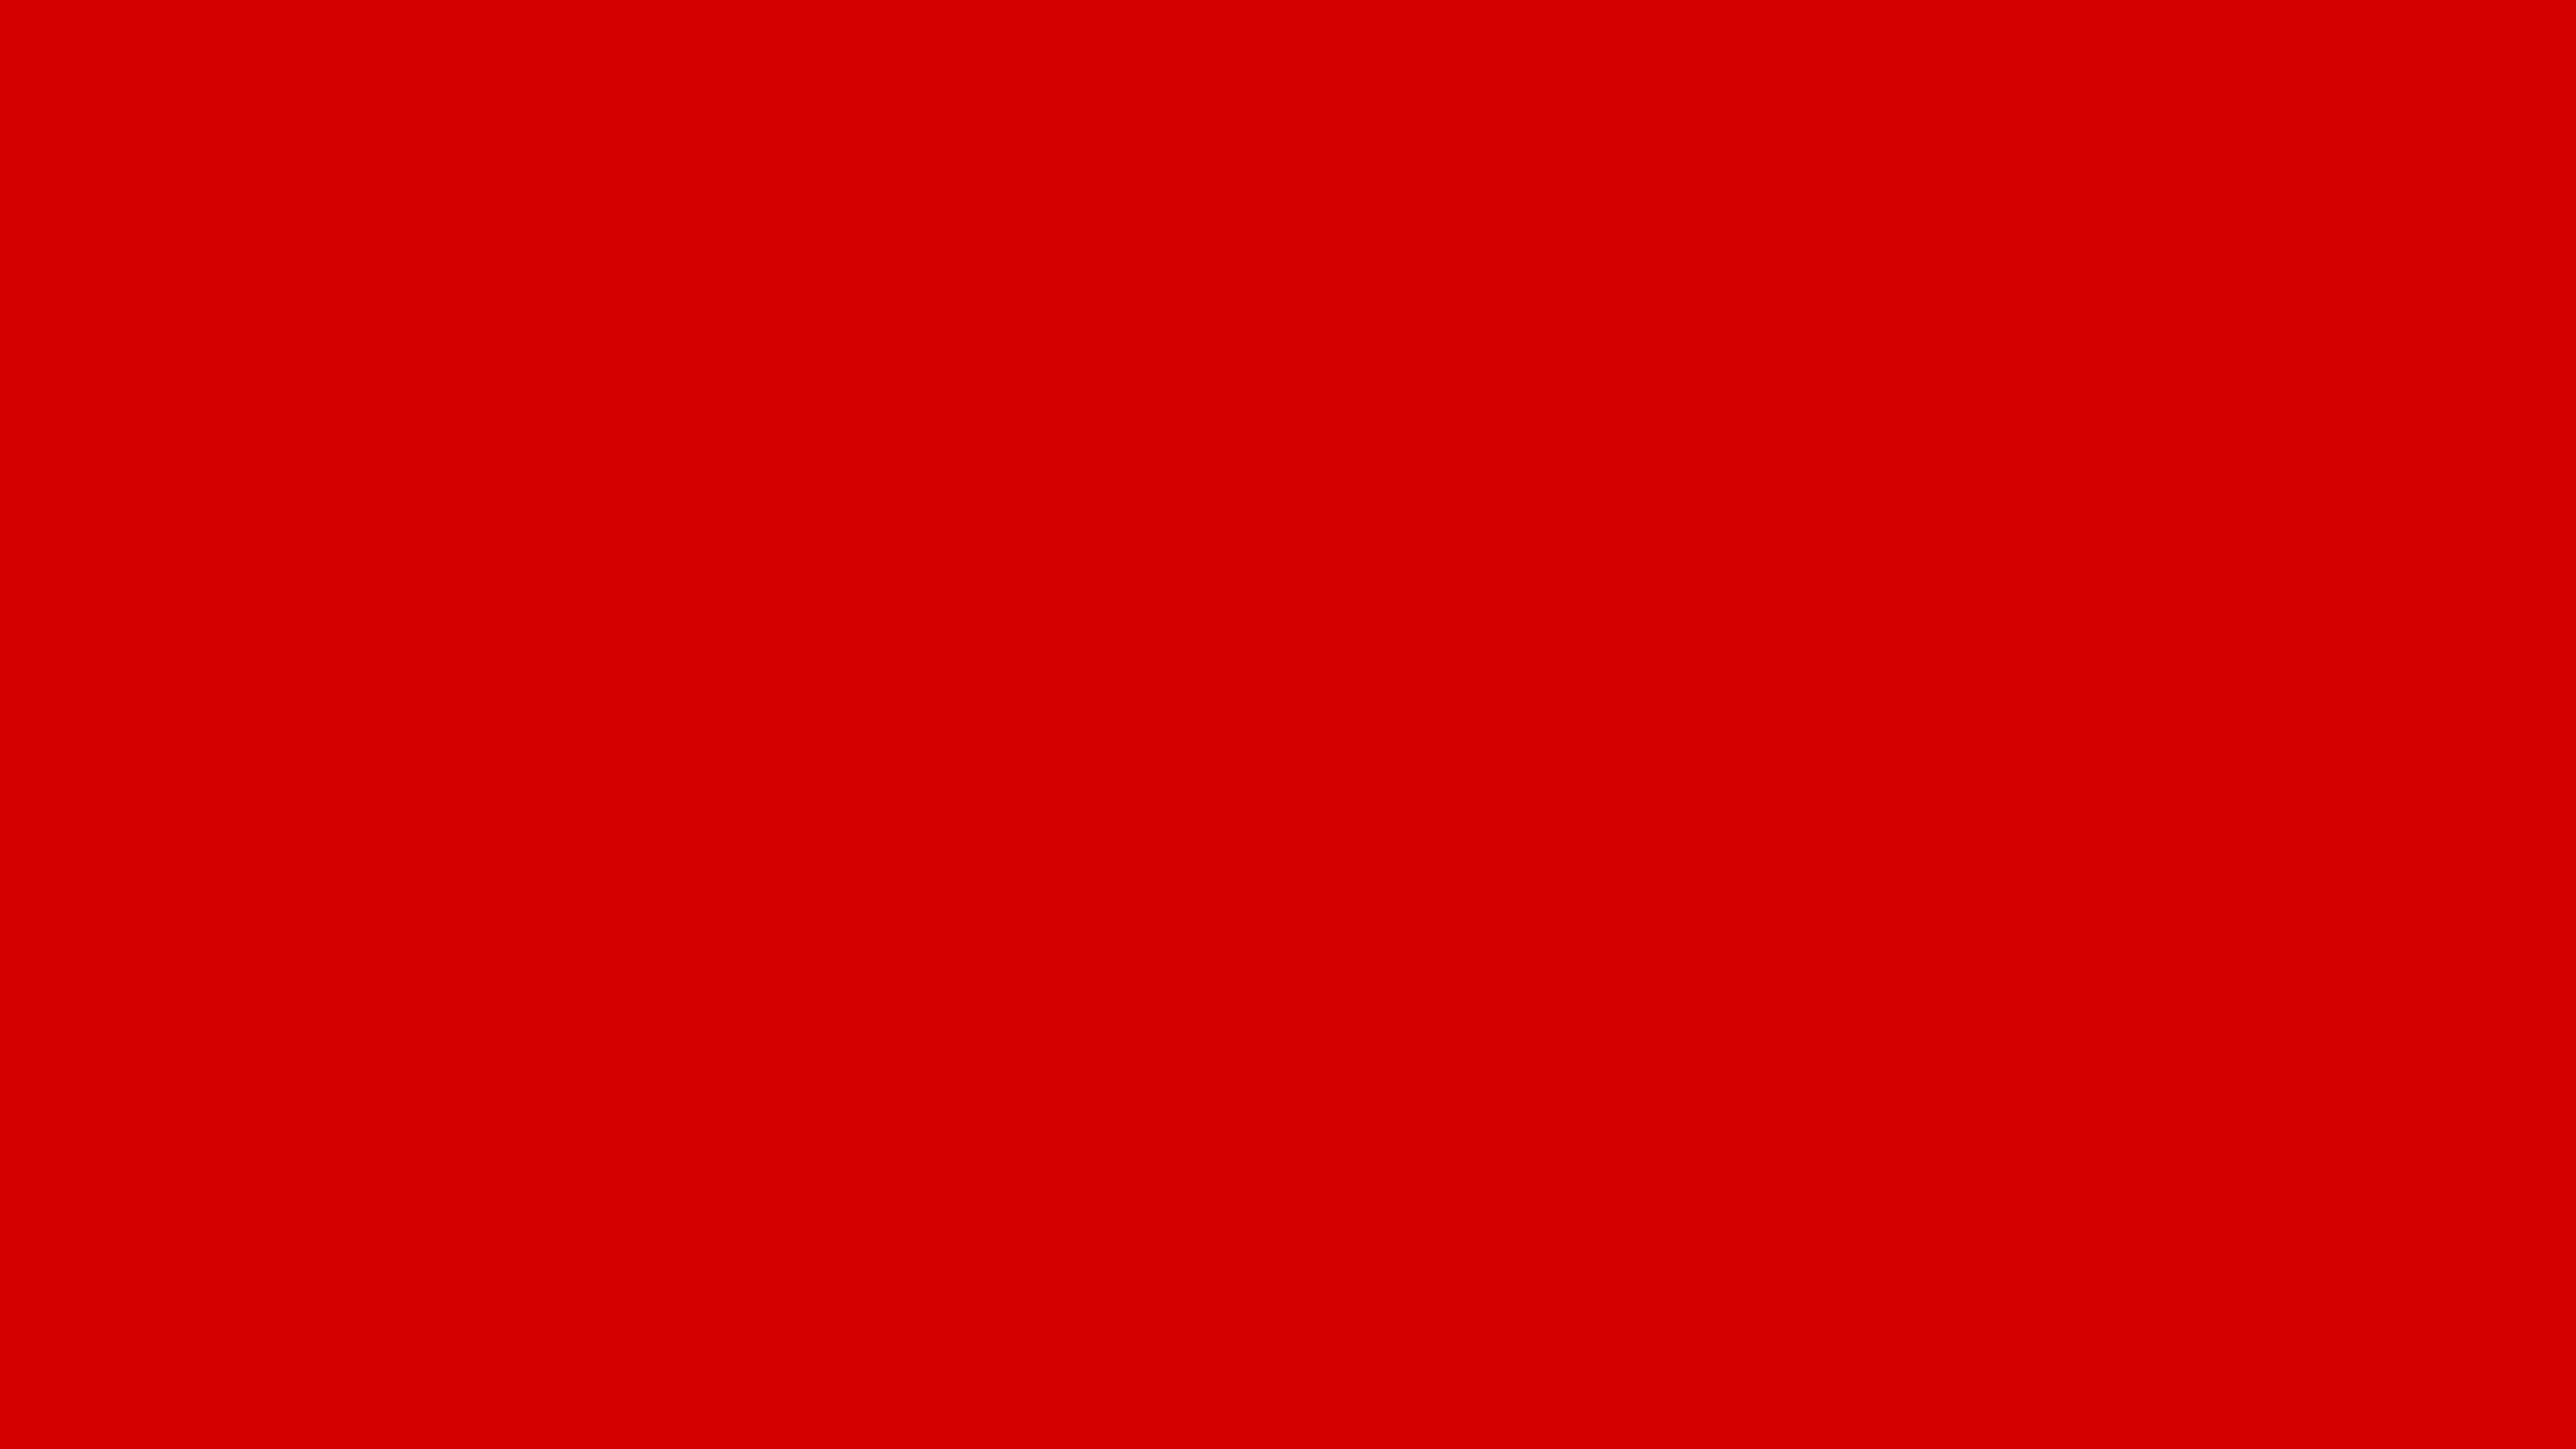 5120x2880 Rosso Corsa Solid Color Background